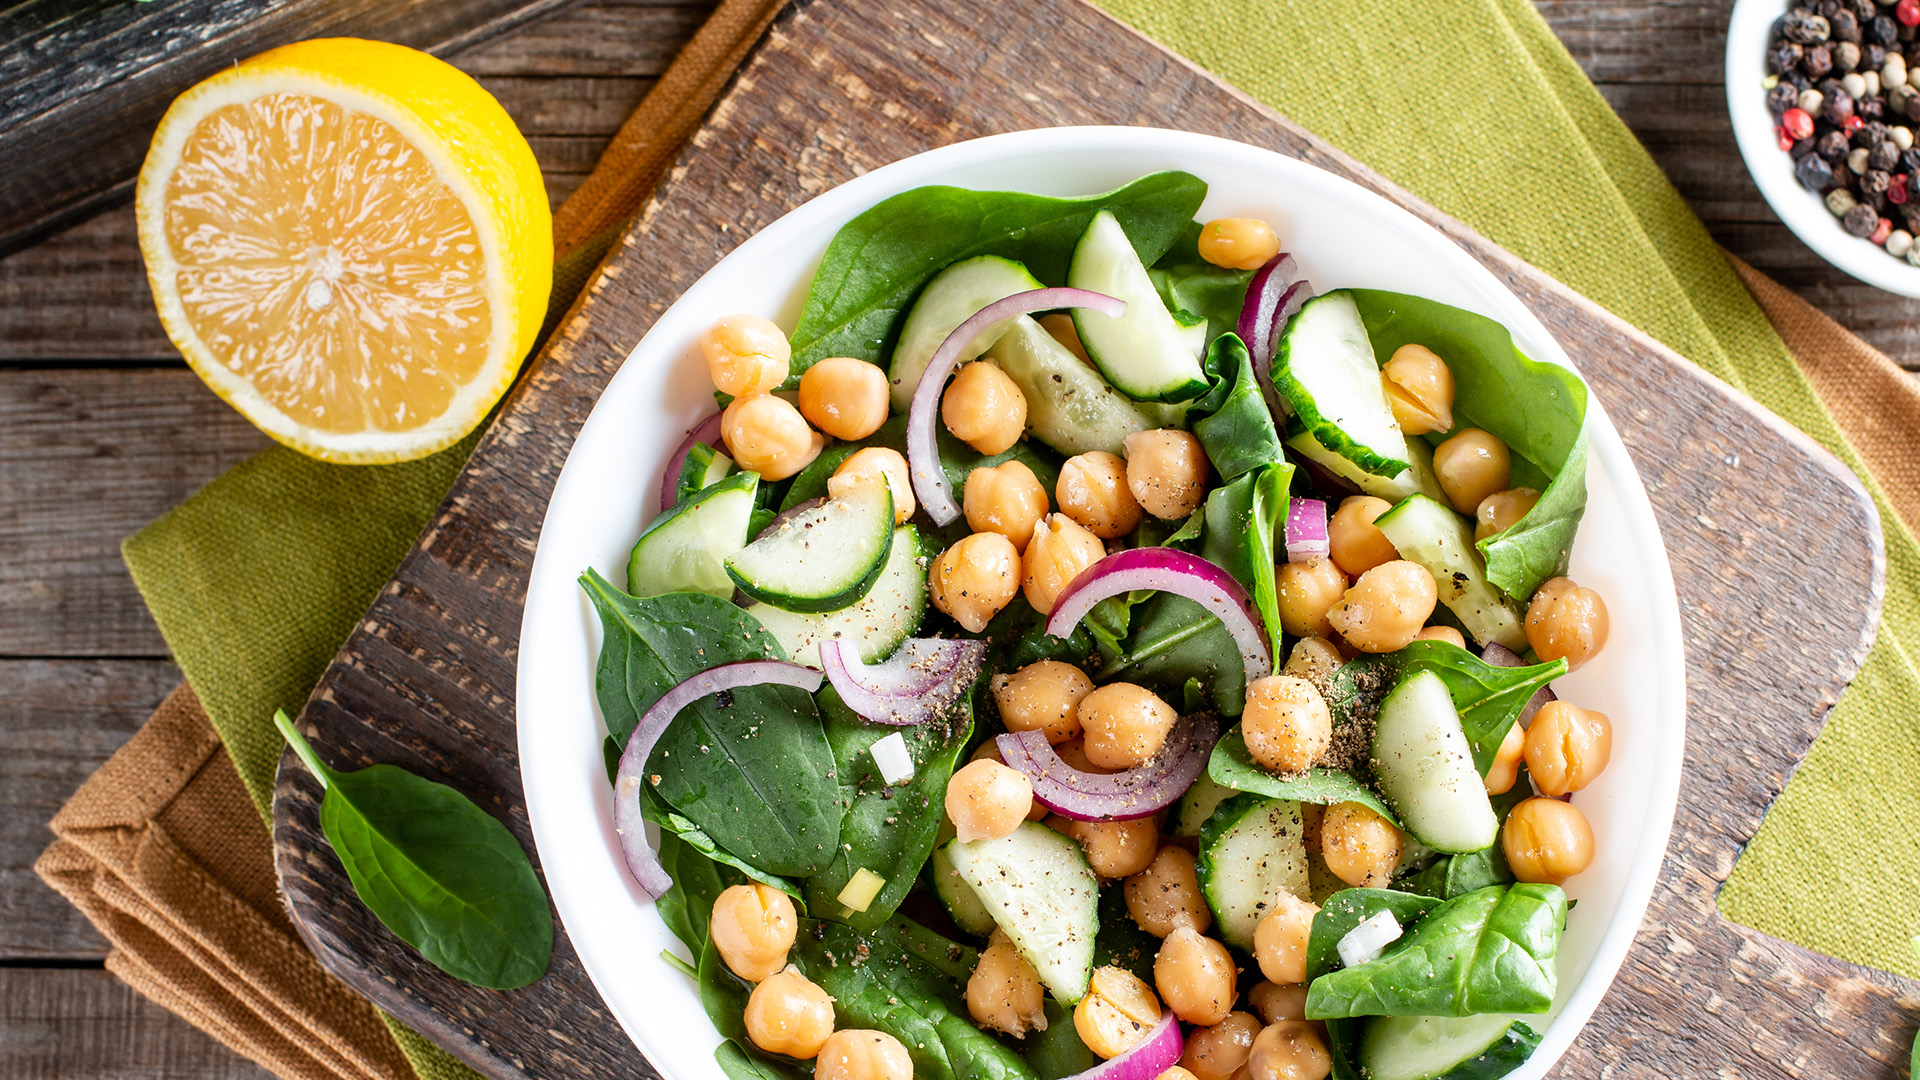 A fresh salad in a white bowl featuring chickpeas, spinach, sliced cucumbers, and red onion rings. The bowl rests on a wooden cutting board with a partial lemon and a pepper grinder visible nearby. The background includes green and brown fabric.